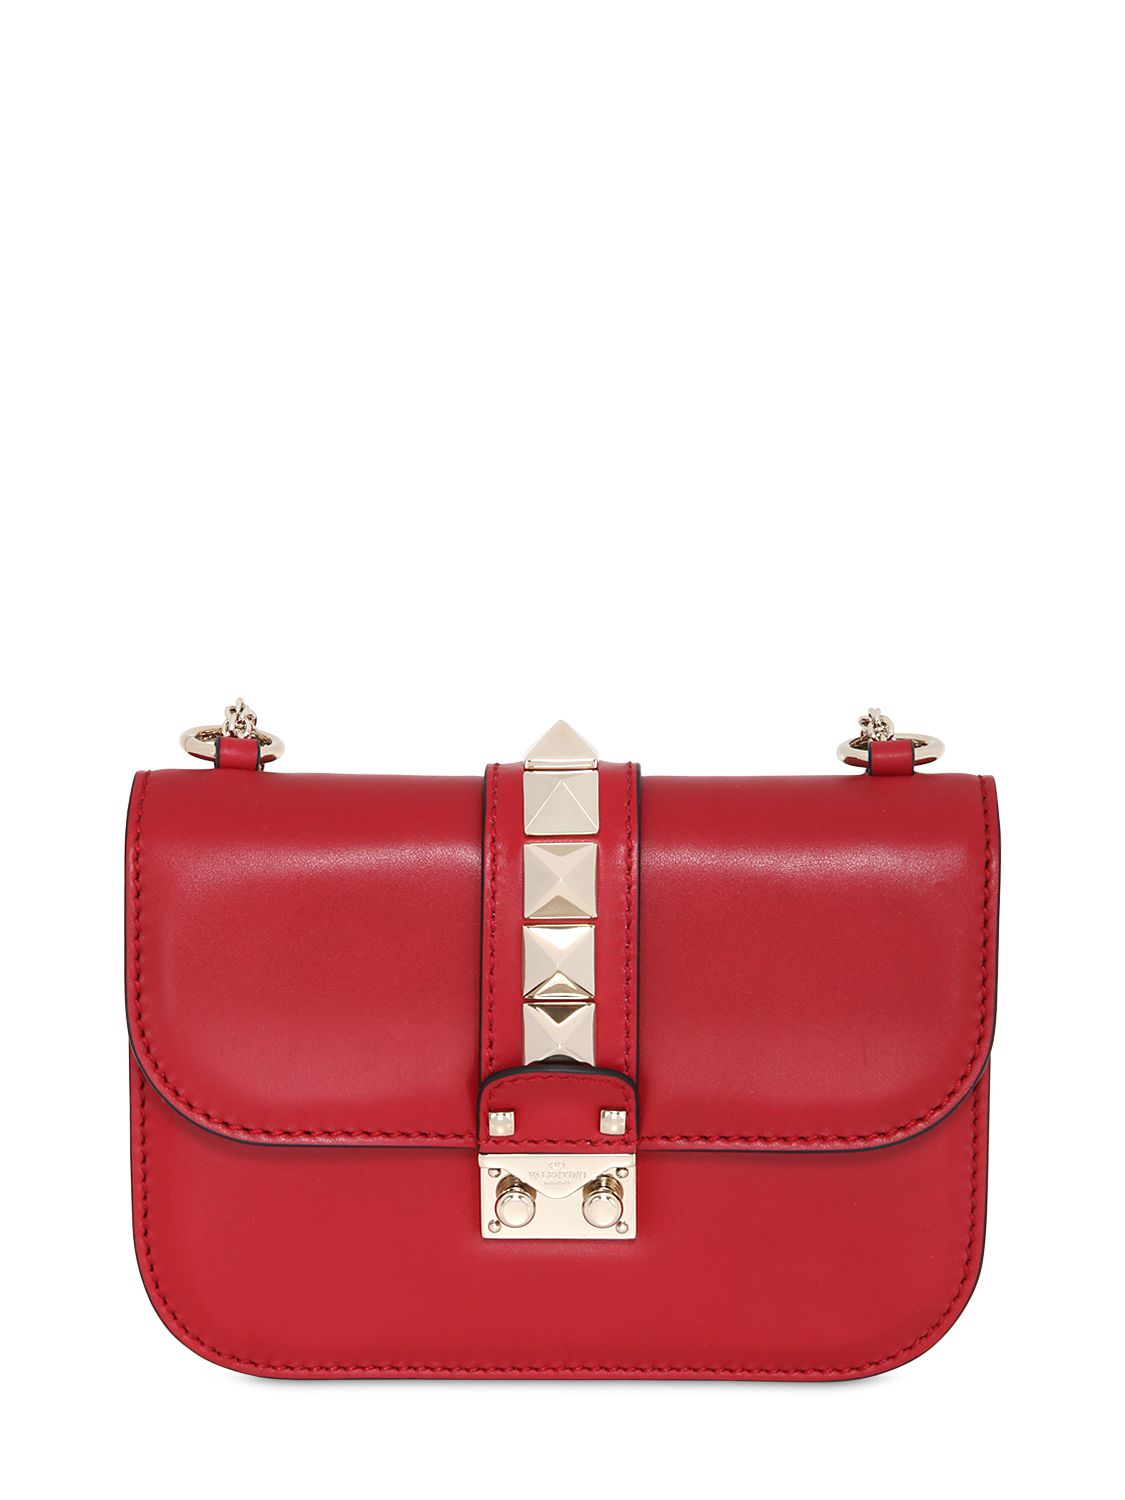 Valentino Small Lock Leather Shoulder Bag in Red - Lyst